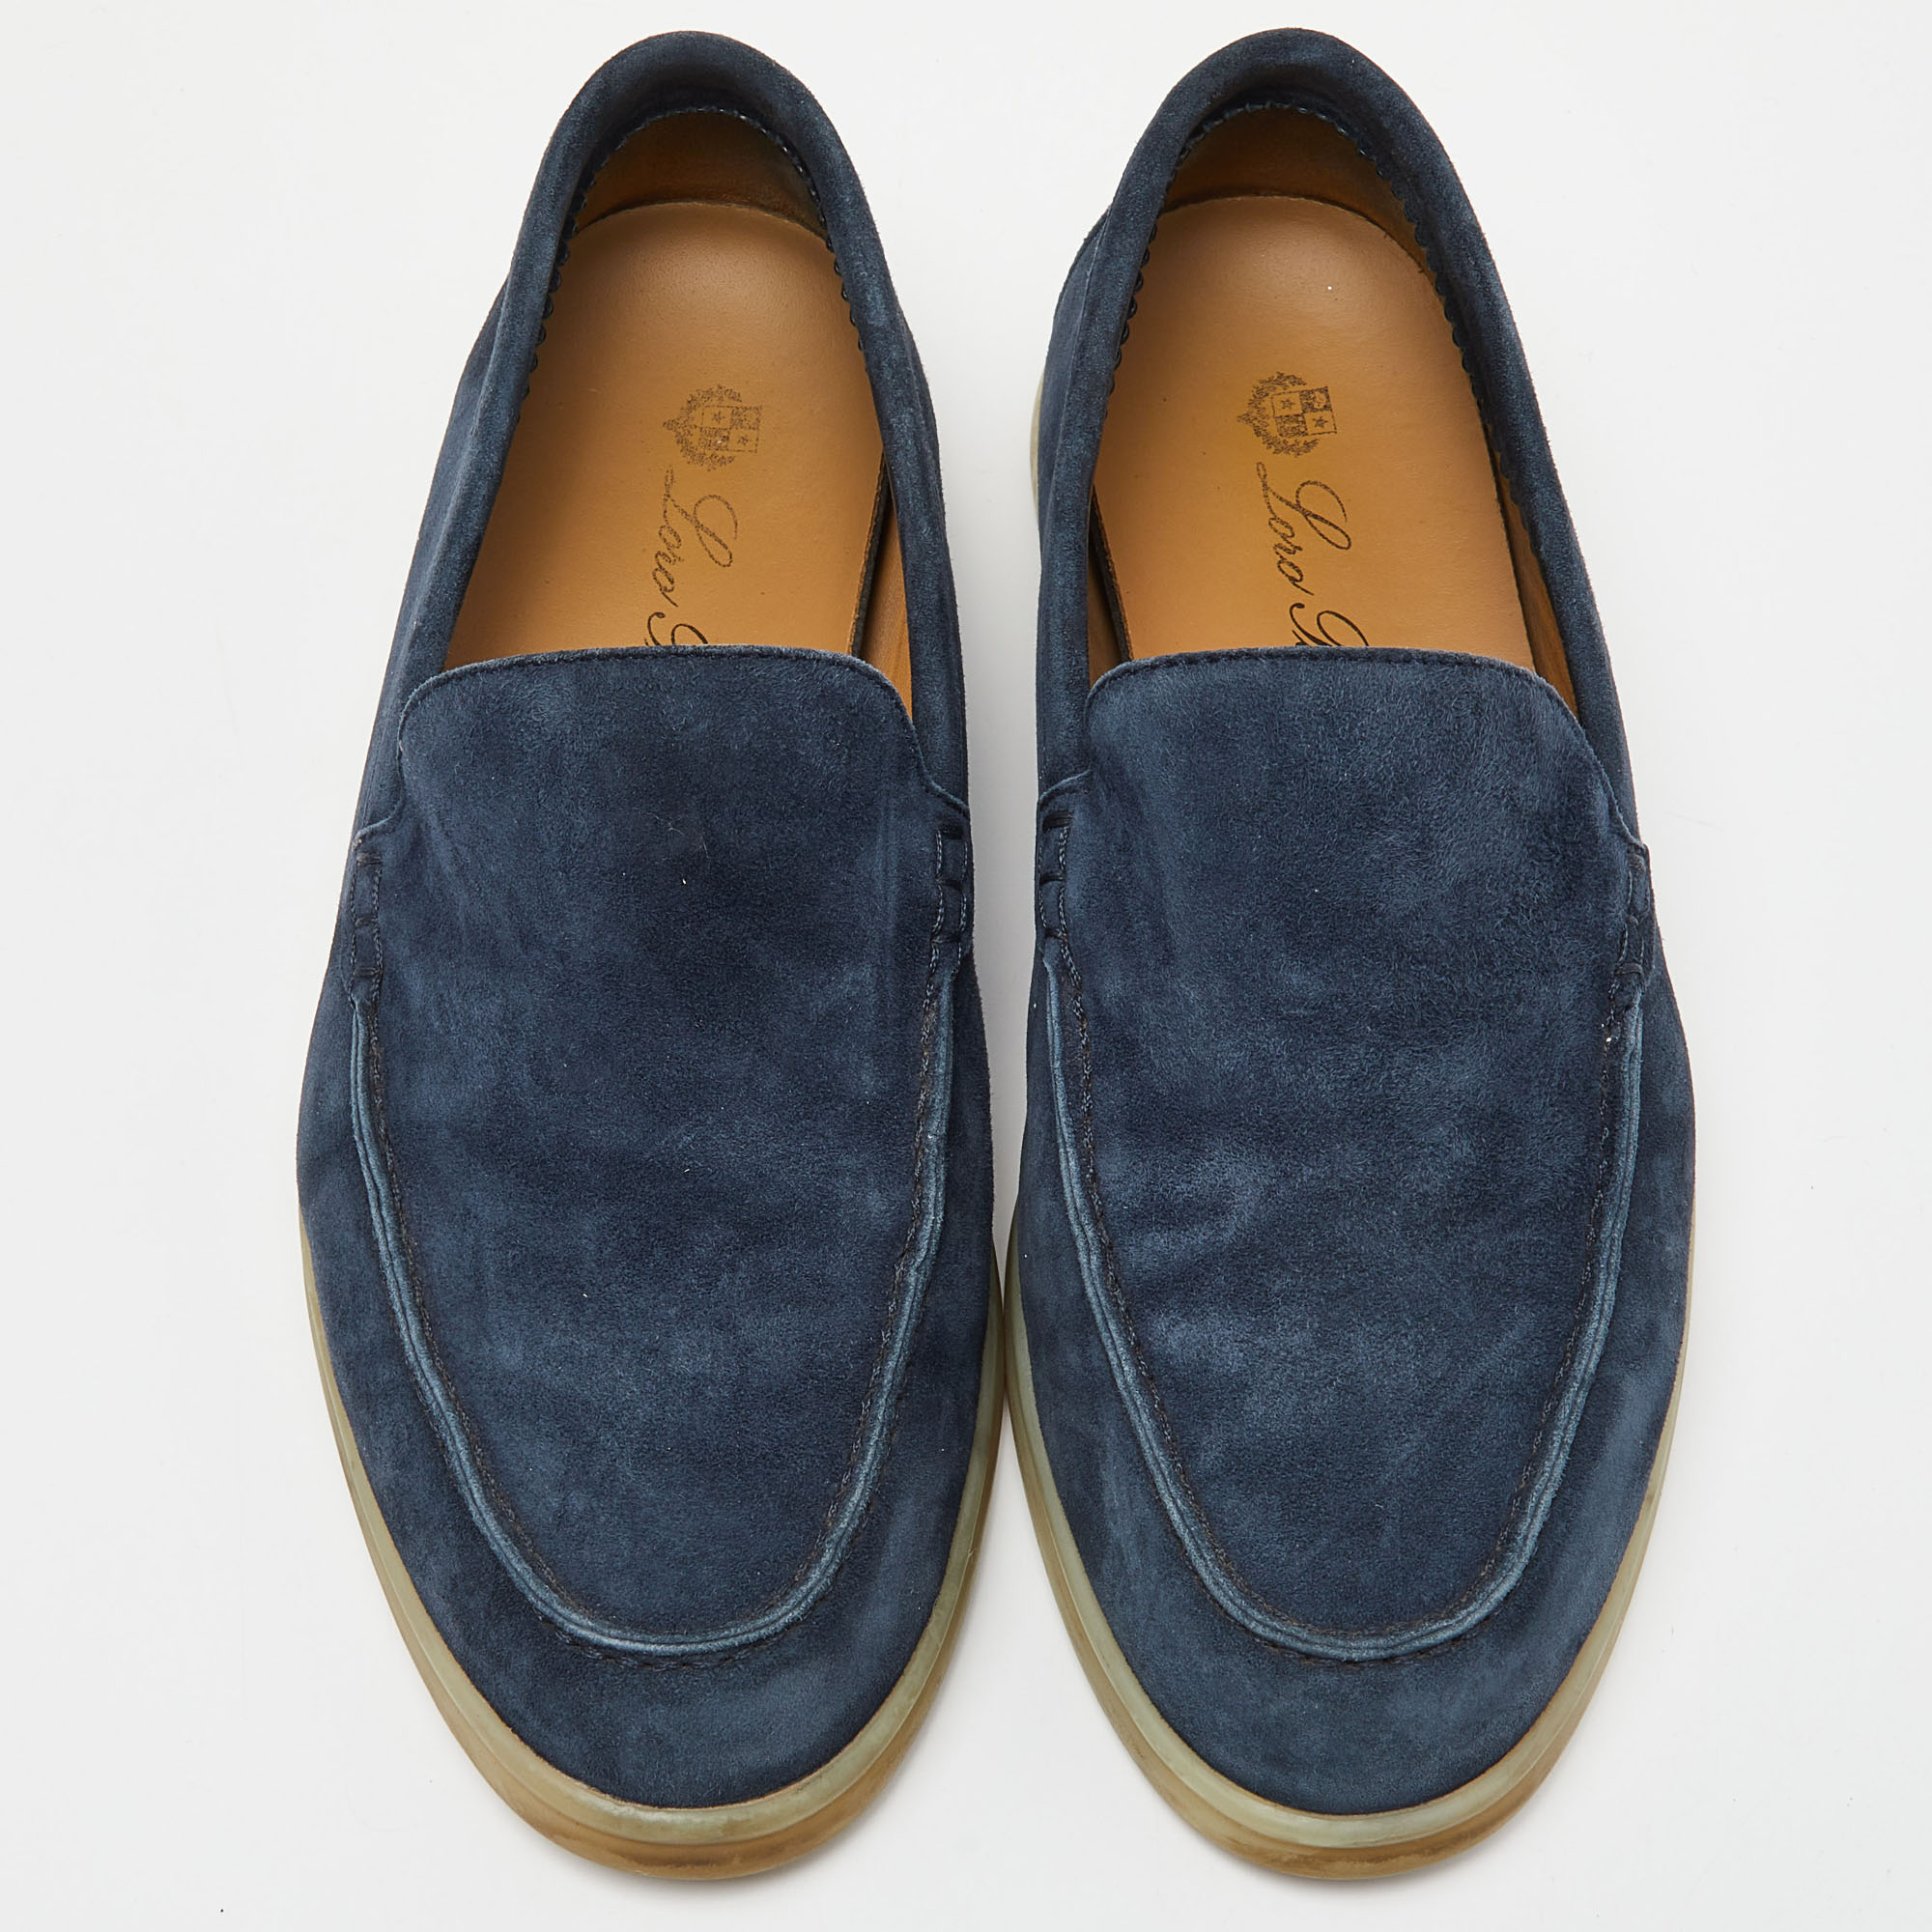 Loro Piana Navy Blue Suede Slip On Loafers Size 36